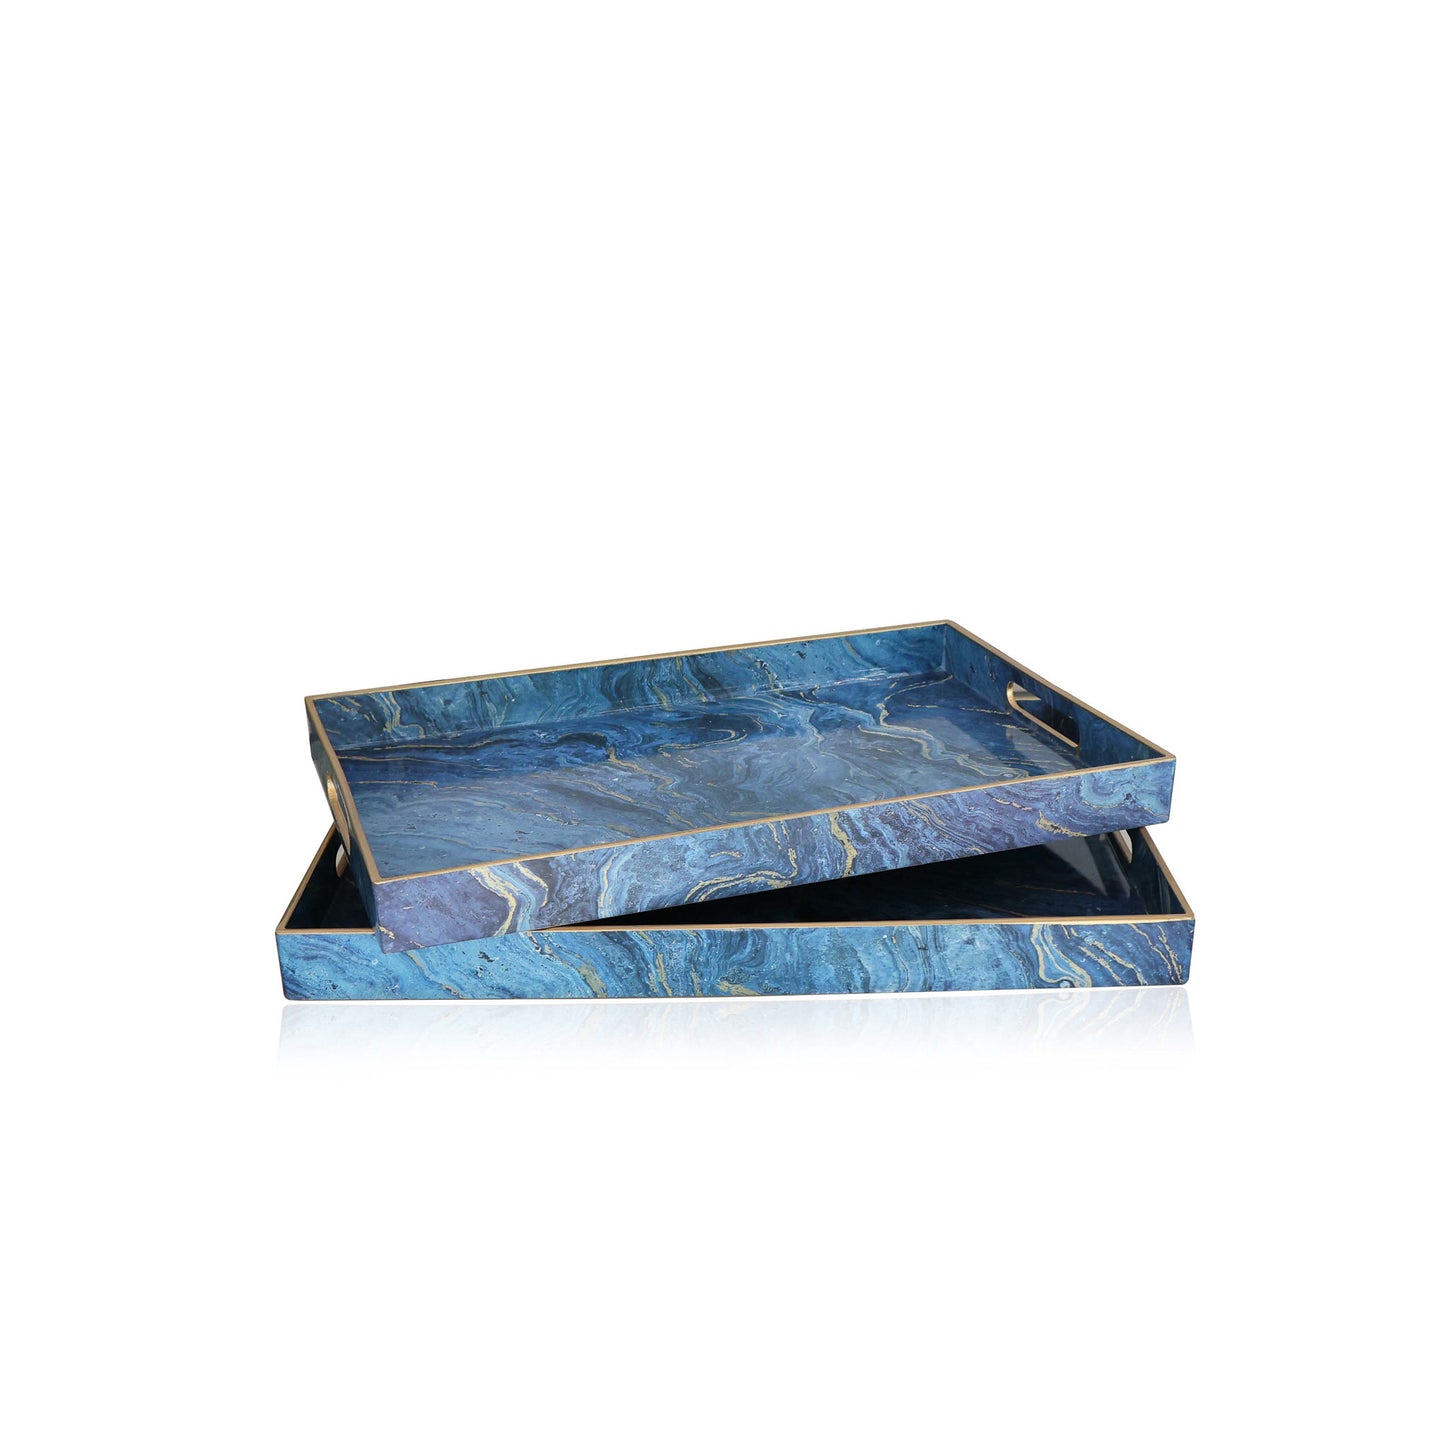 Set of 2 Blue marble effect trays